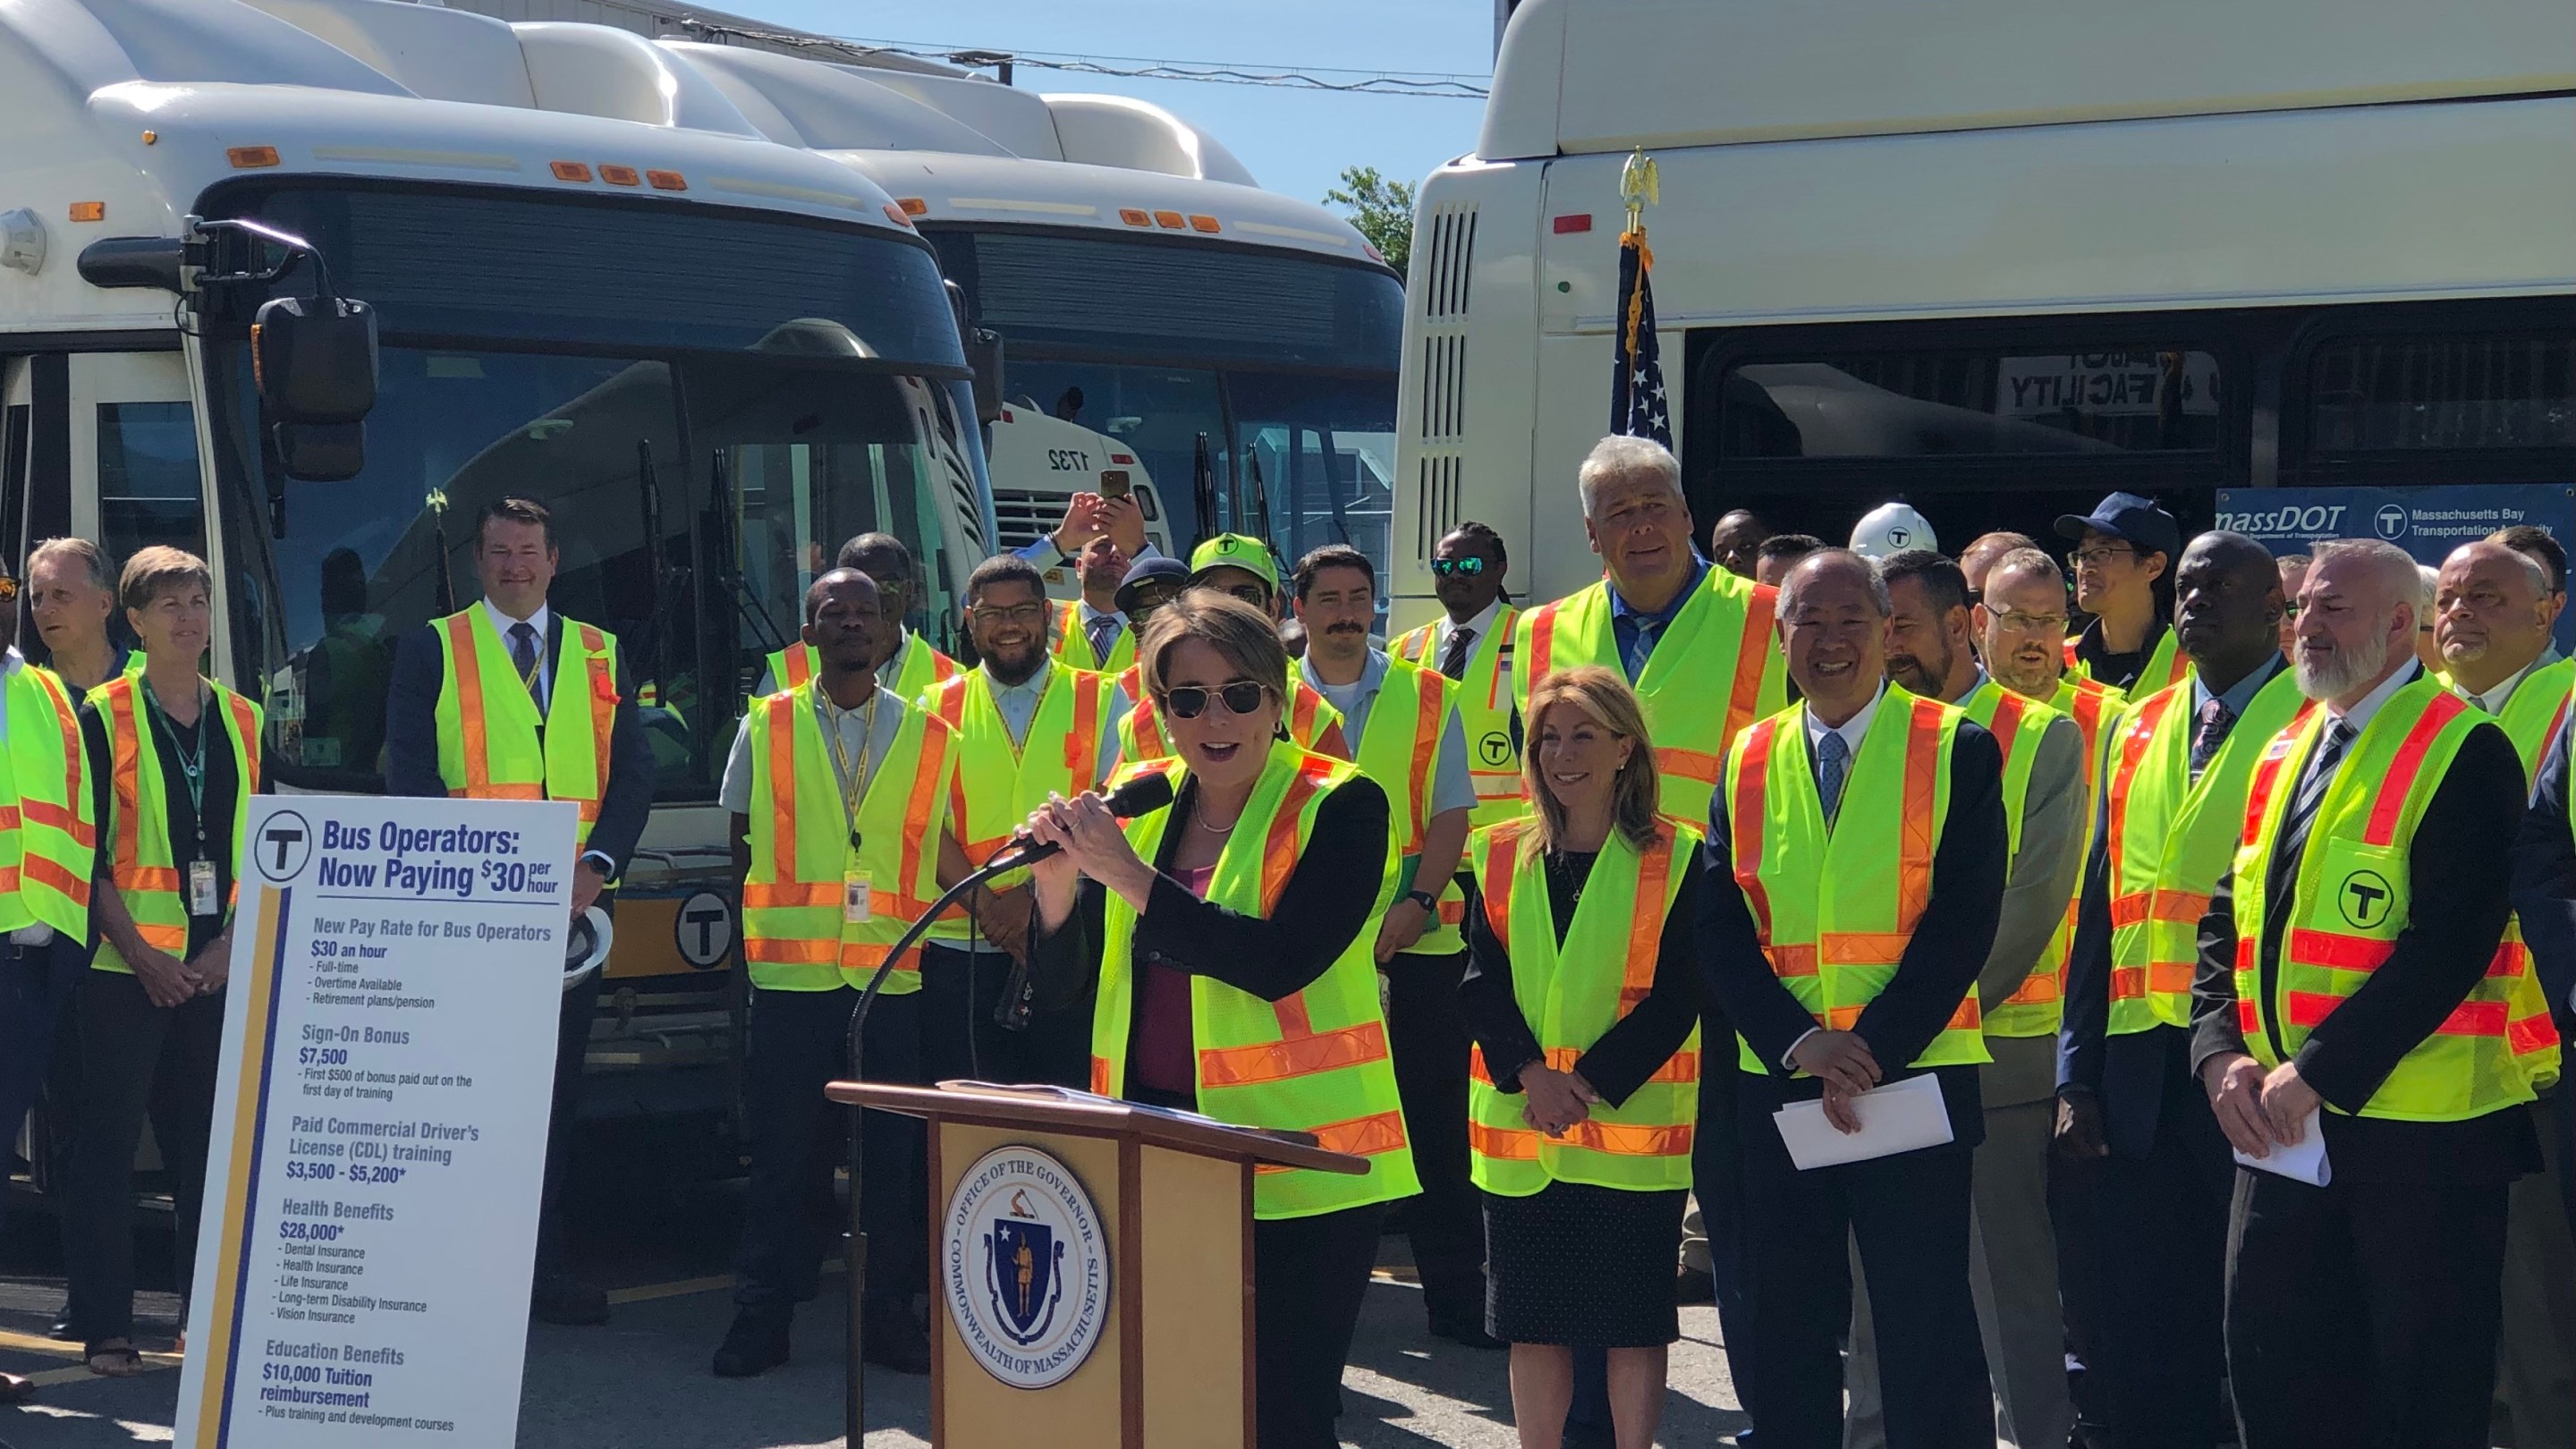 A crowd of people in yellow flourescent safety vests stands behind a podium where the Massachusetts Governor is speaking. To her left is a poster that outlines the new wages and benefits for newly-hired bus drivers under the terms of a new labor deal, with a $30 per hour wage in bold lettering at the top.